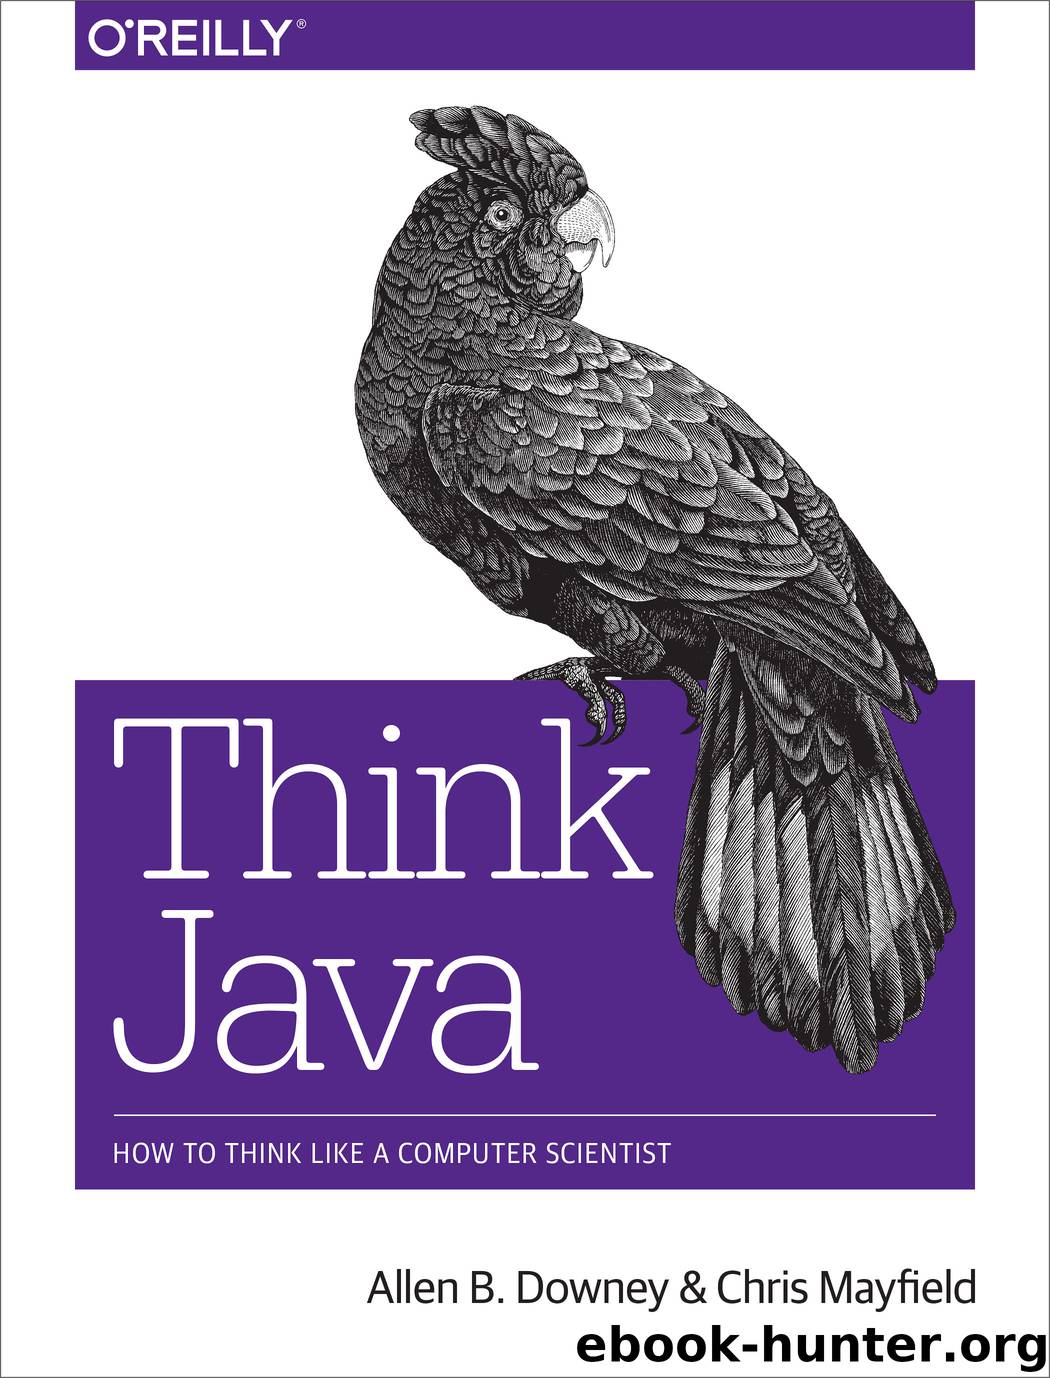 Think Java by Allen B. Downey & Chris Mayfield